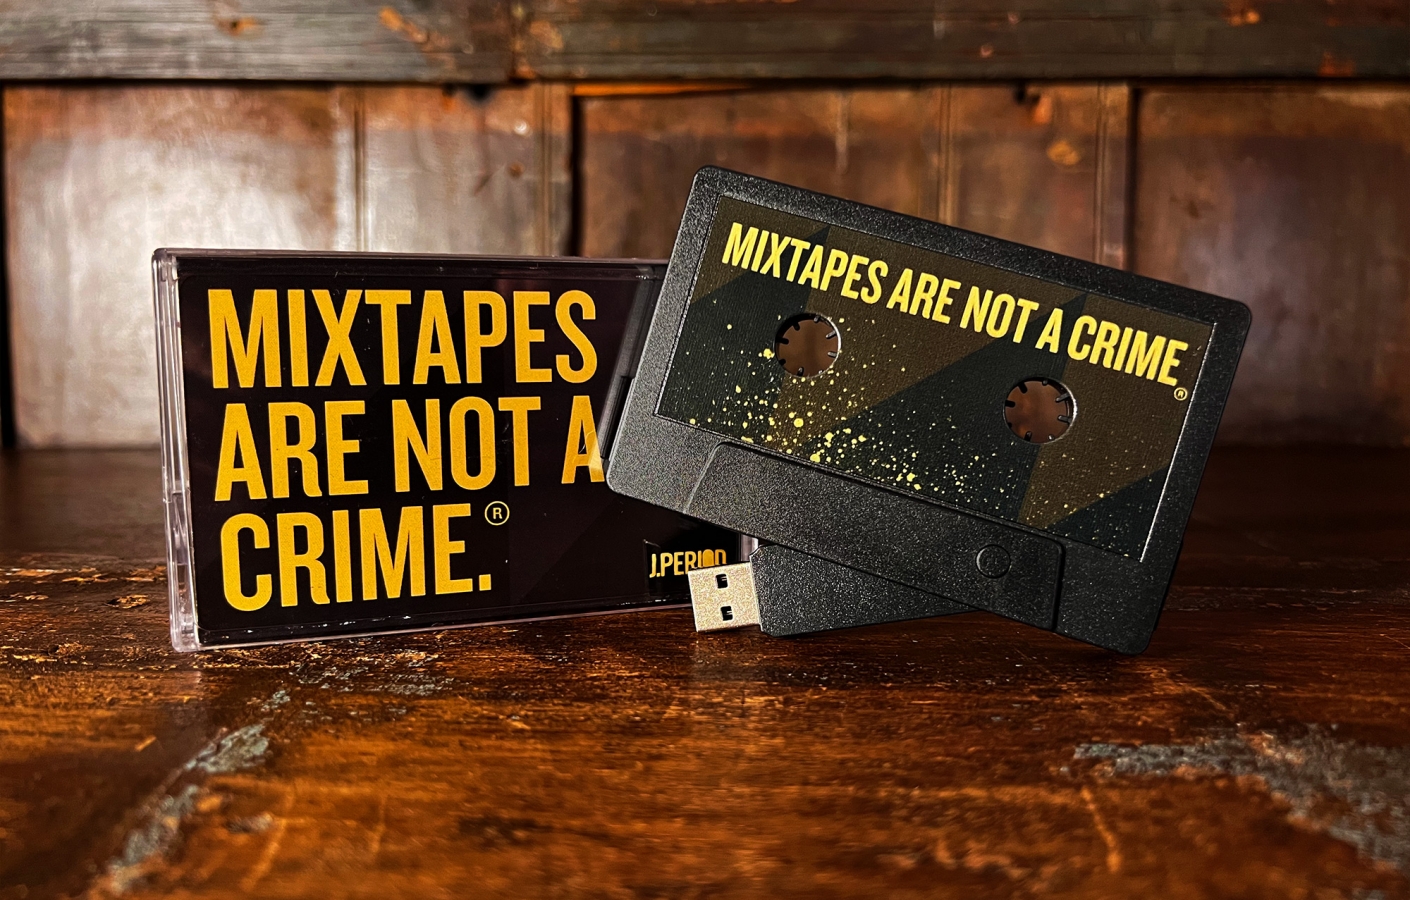 “Mixtapes Are Not A Crime” Limited Edition USB Mixtape + Complete J.PERIOD Collection